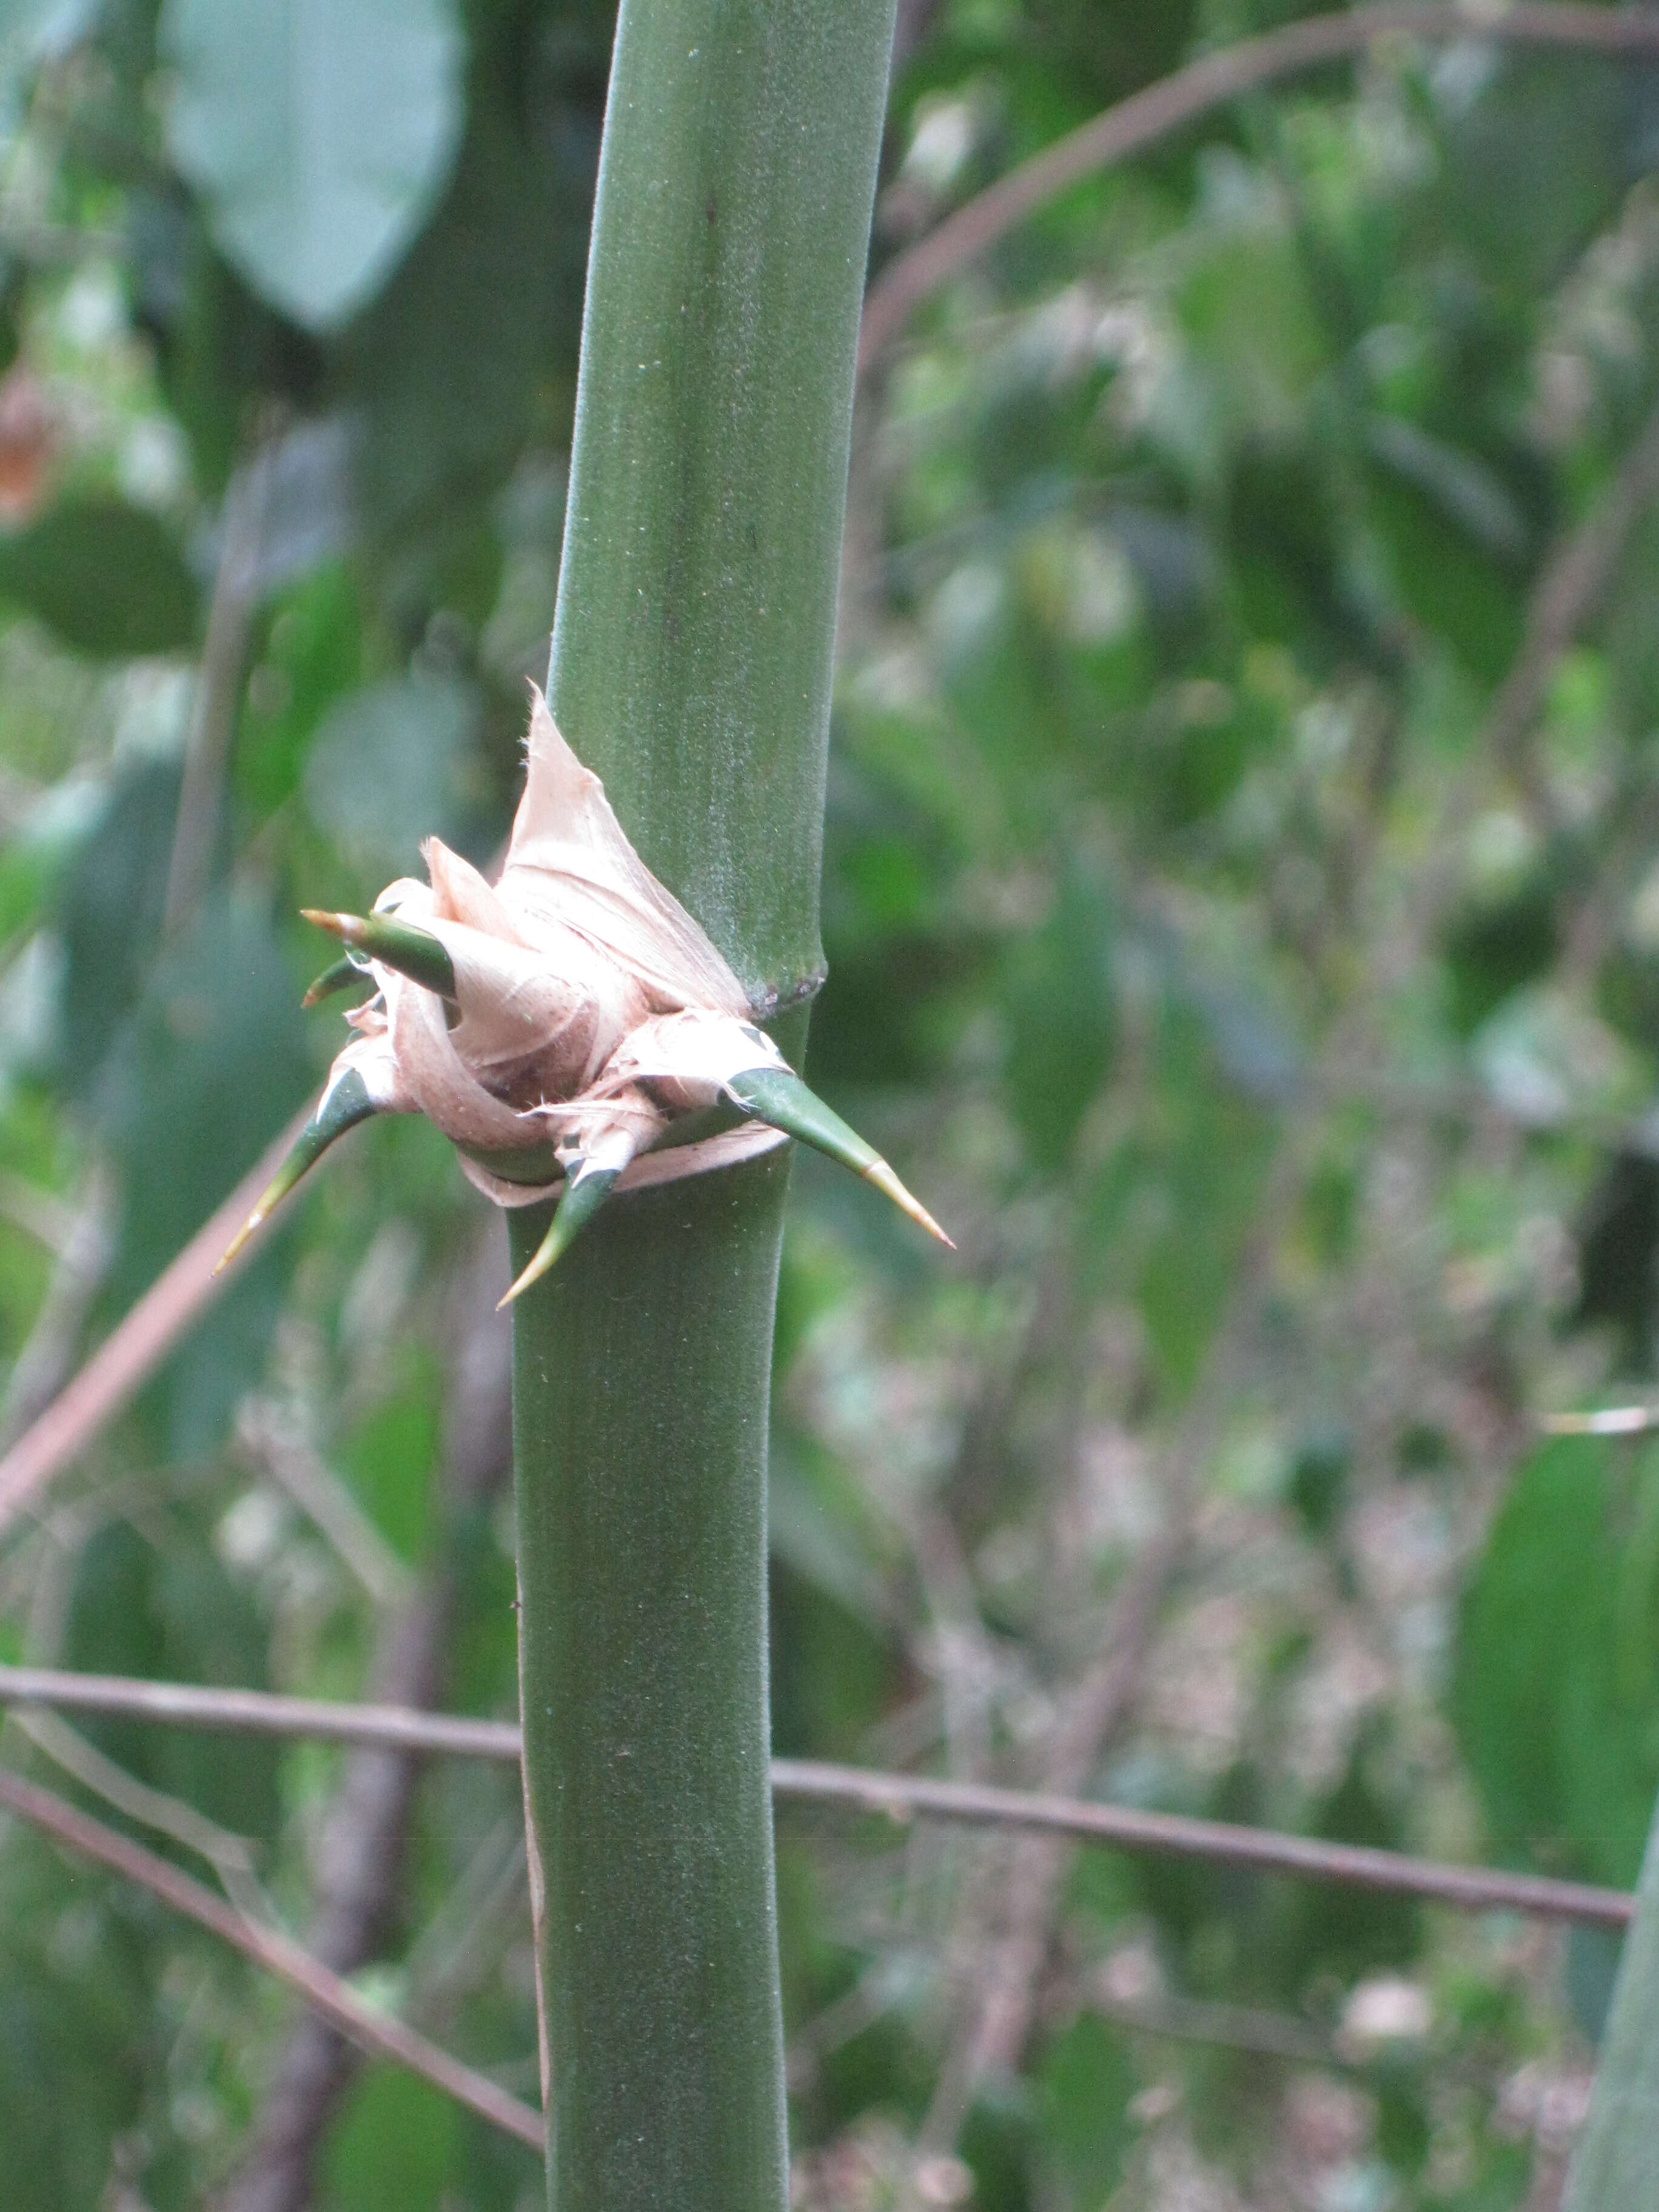 Image of bamboo